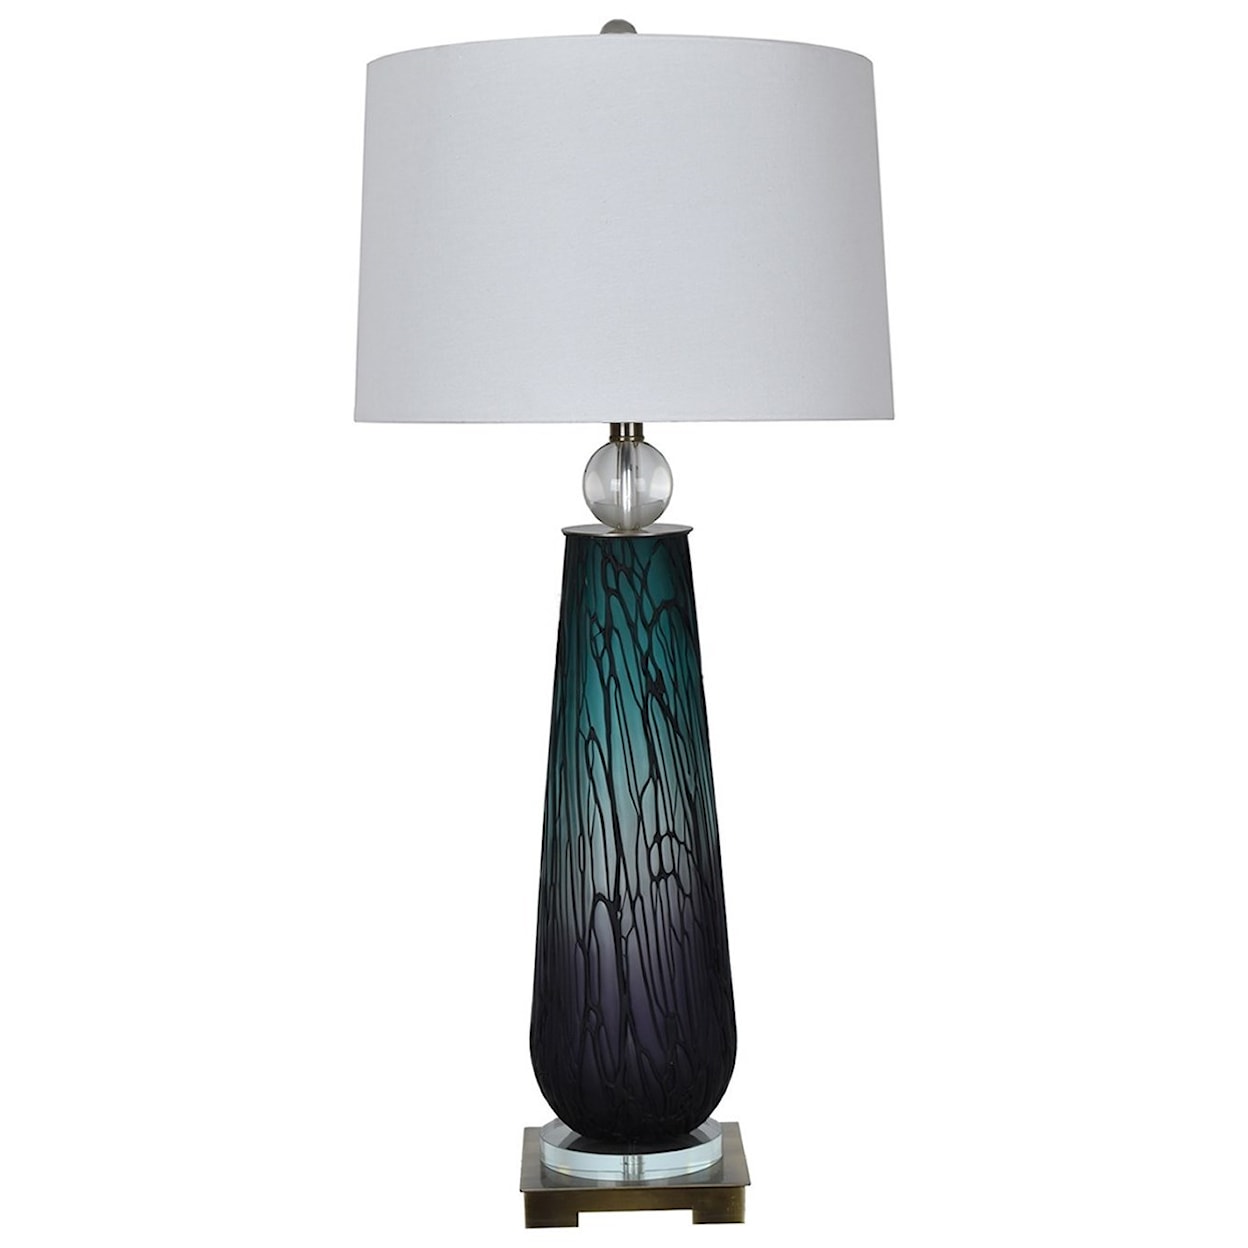 Crestview Collection Lighting Astor Table Lamp 